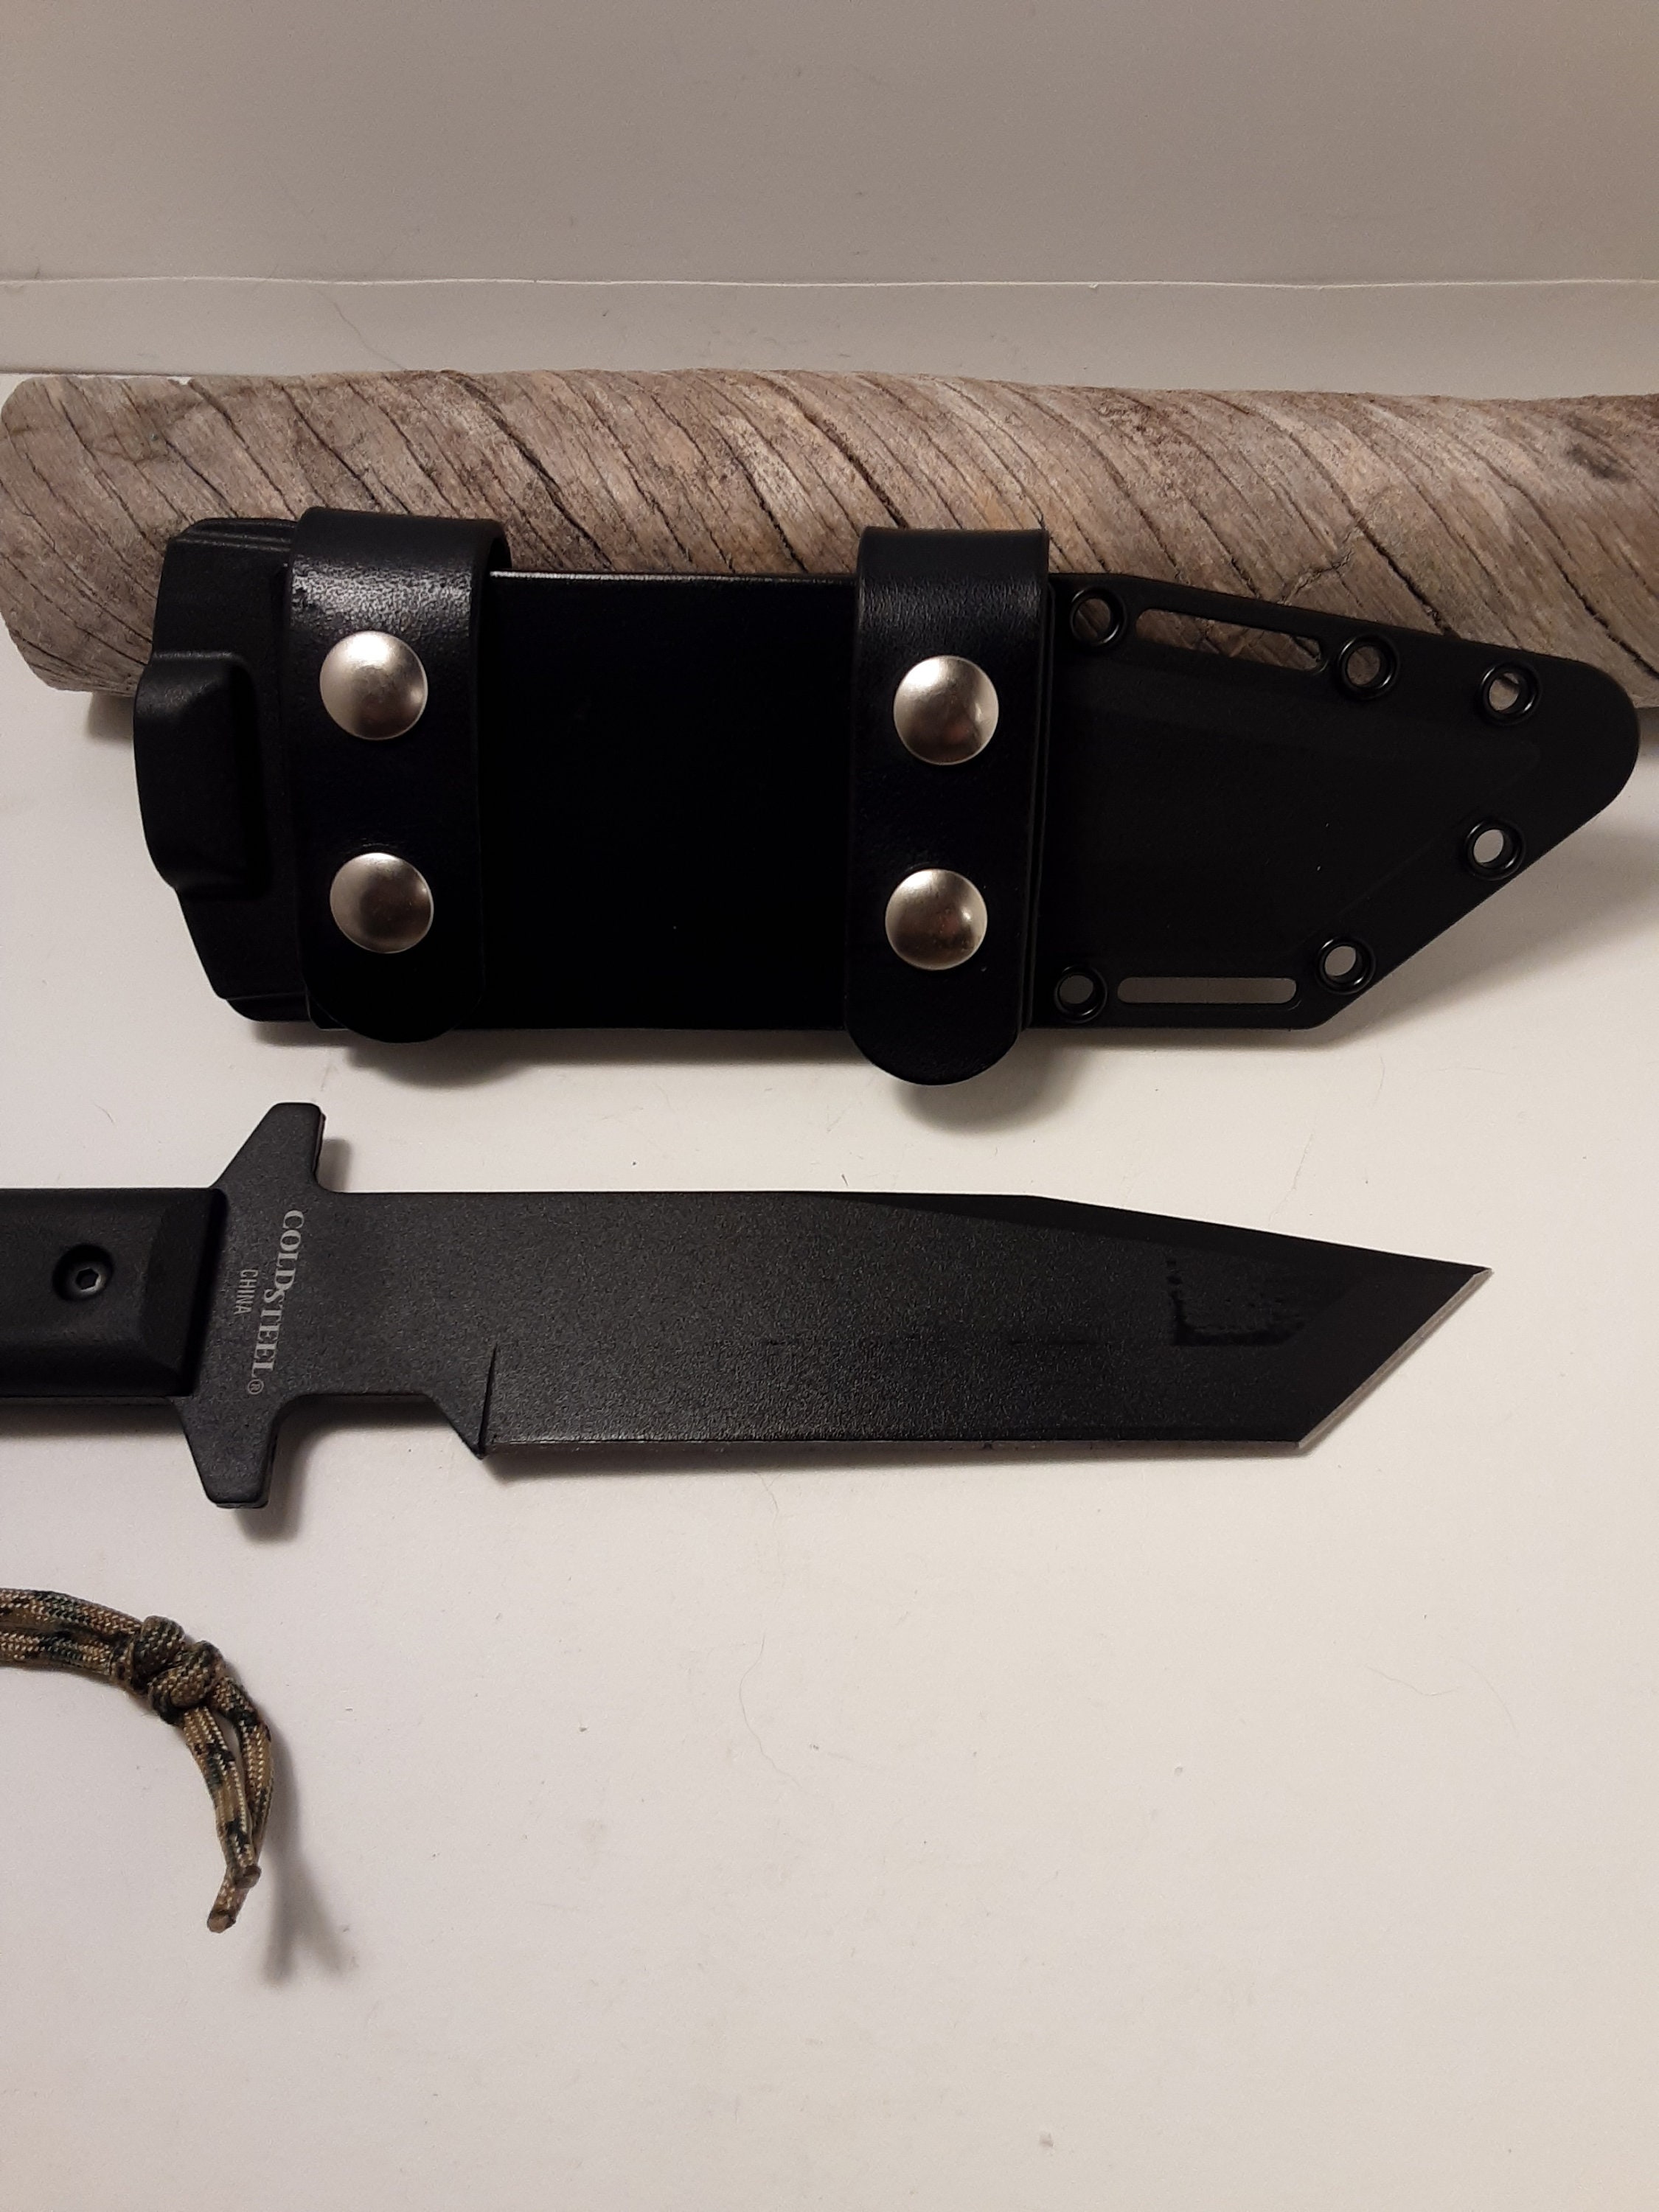 Leather & Kydex Drop Leg for Cold Steel GI Tanto (no Knife Or